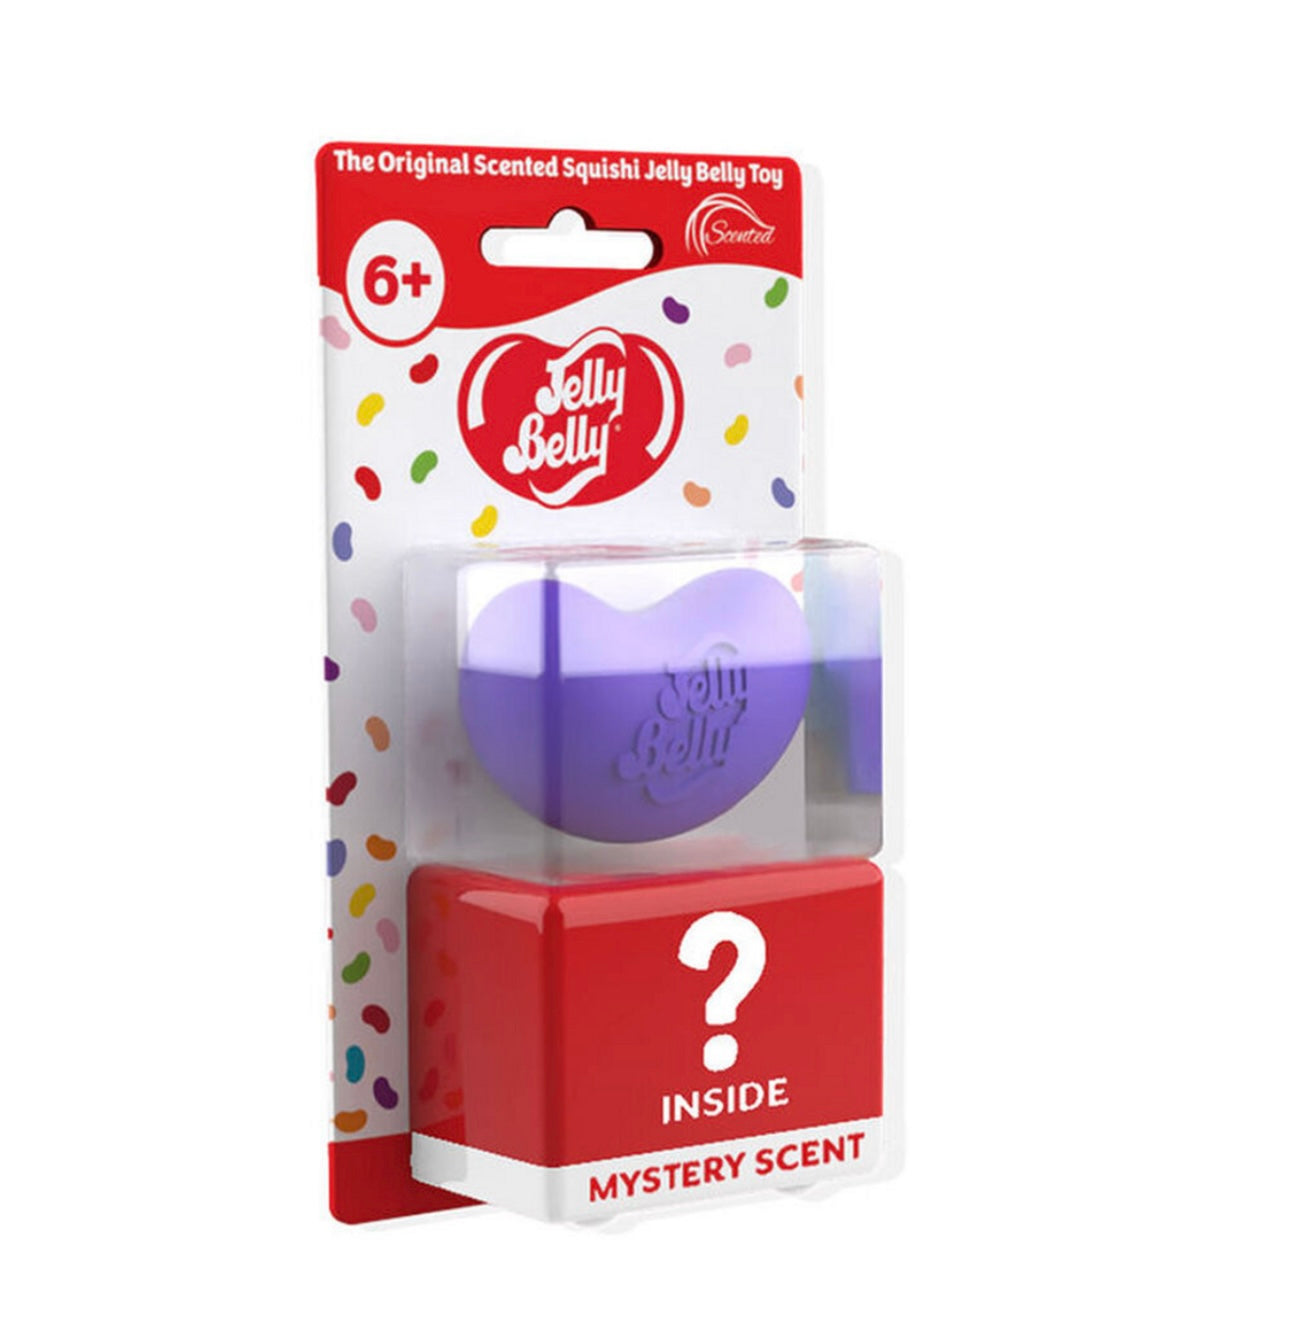 Jelly Belly Scented Squishy